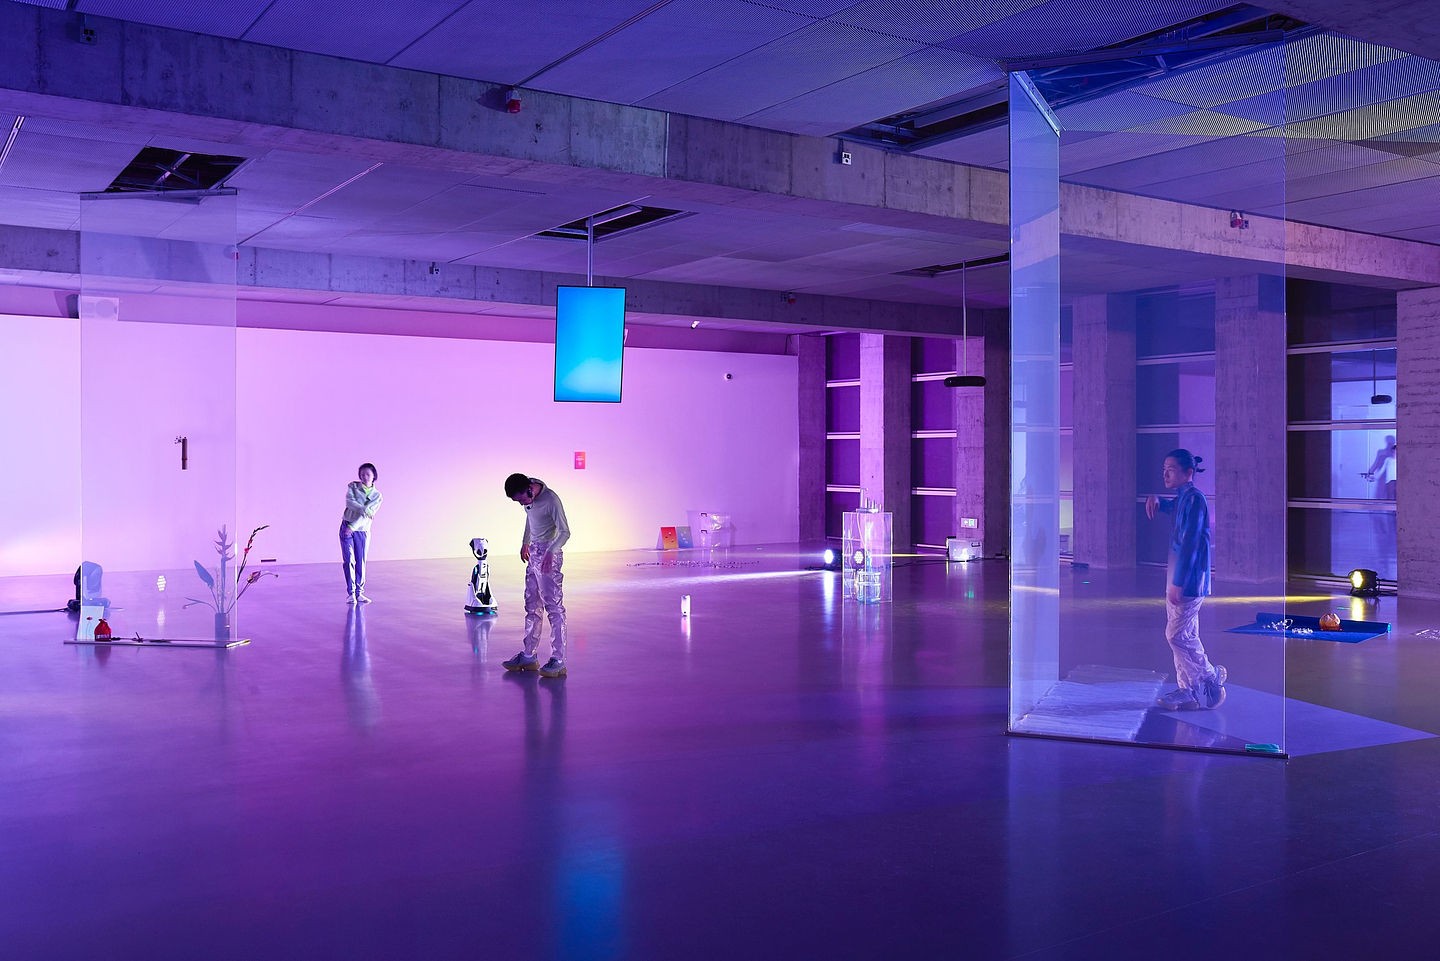 A photograph of an exhibition installed in a large open plan space. Two transparent screens are placed at either end of the space and reach from the floor to the ceiling, while a LED monitor suspended from the middle of the ceiling plays back a blue screen. A flower arrangement, small robot, clear perspex plinth, and other objects are placed intermittently at various points across the floor. In between the objects three performers can be seen enacting simple gestural movements. The space is lit by vibrant purple lights.